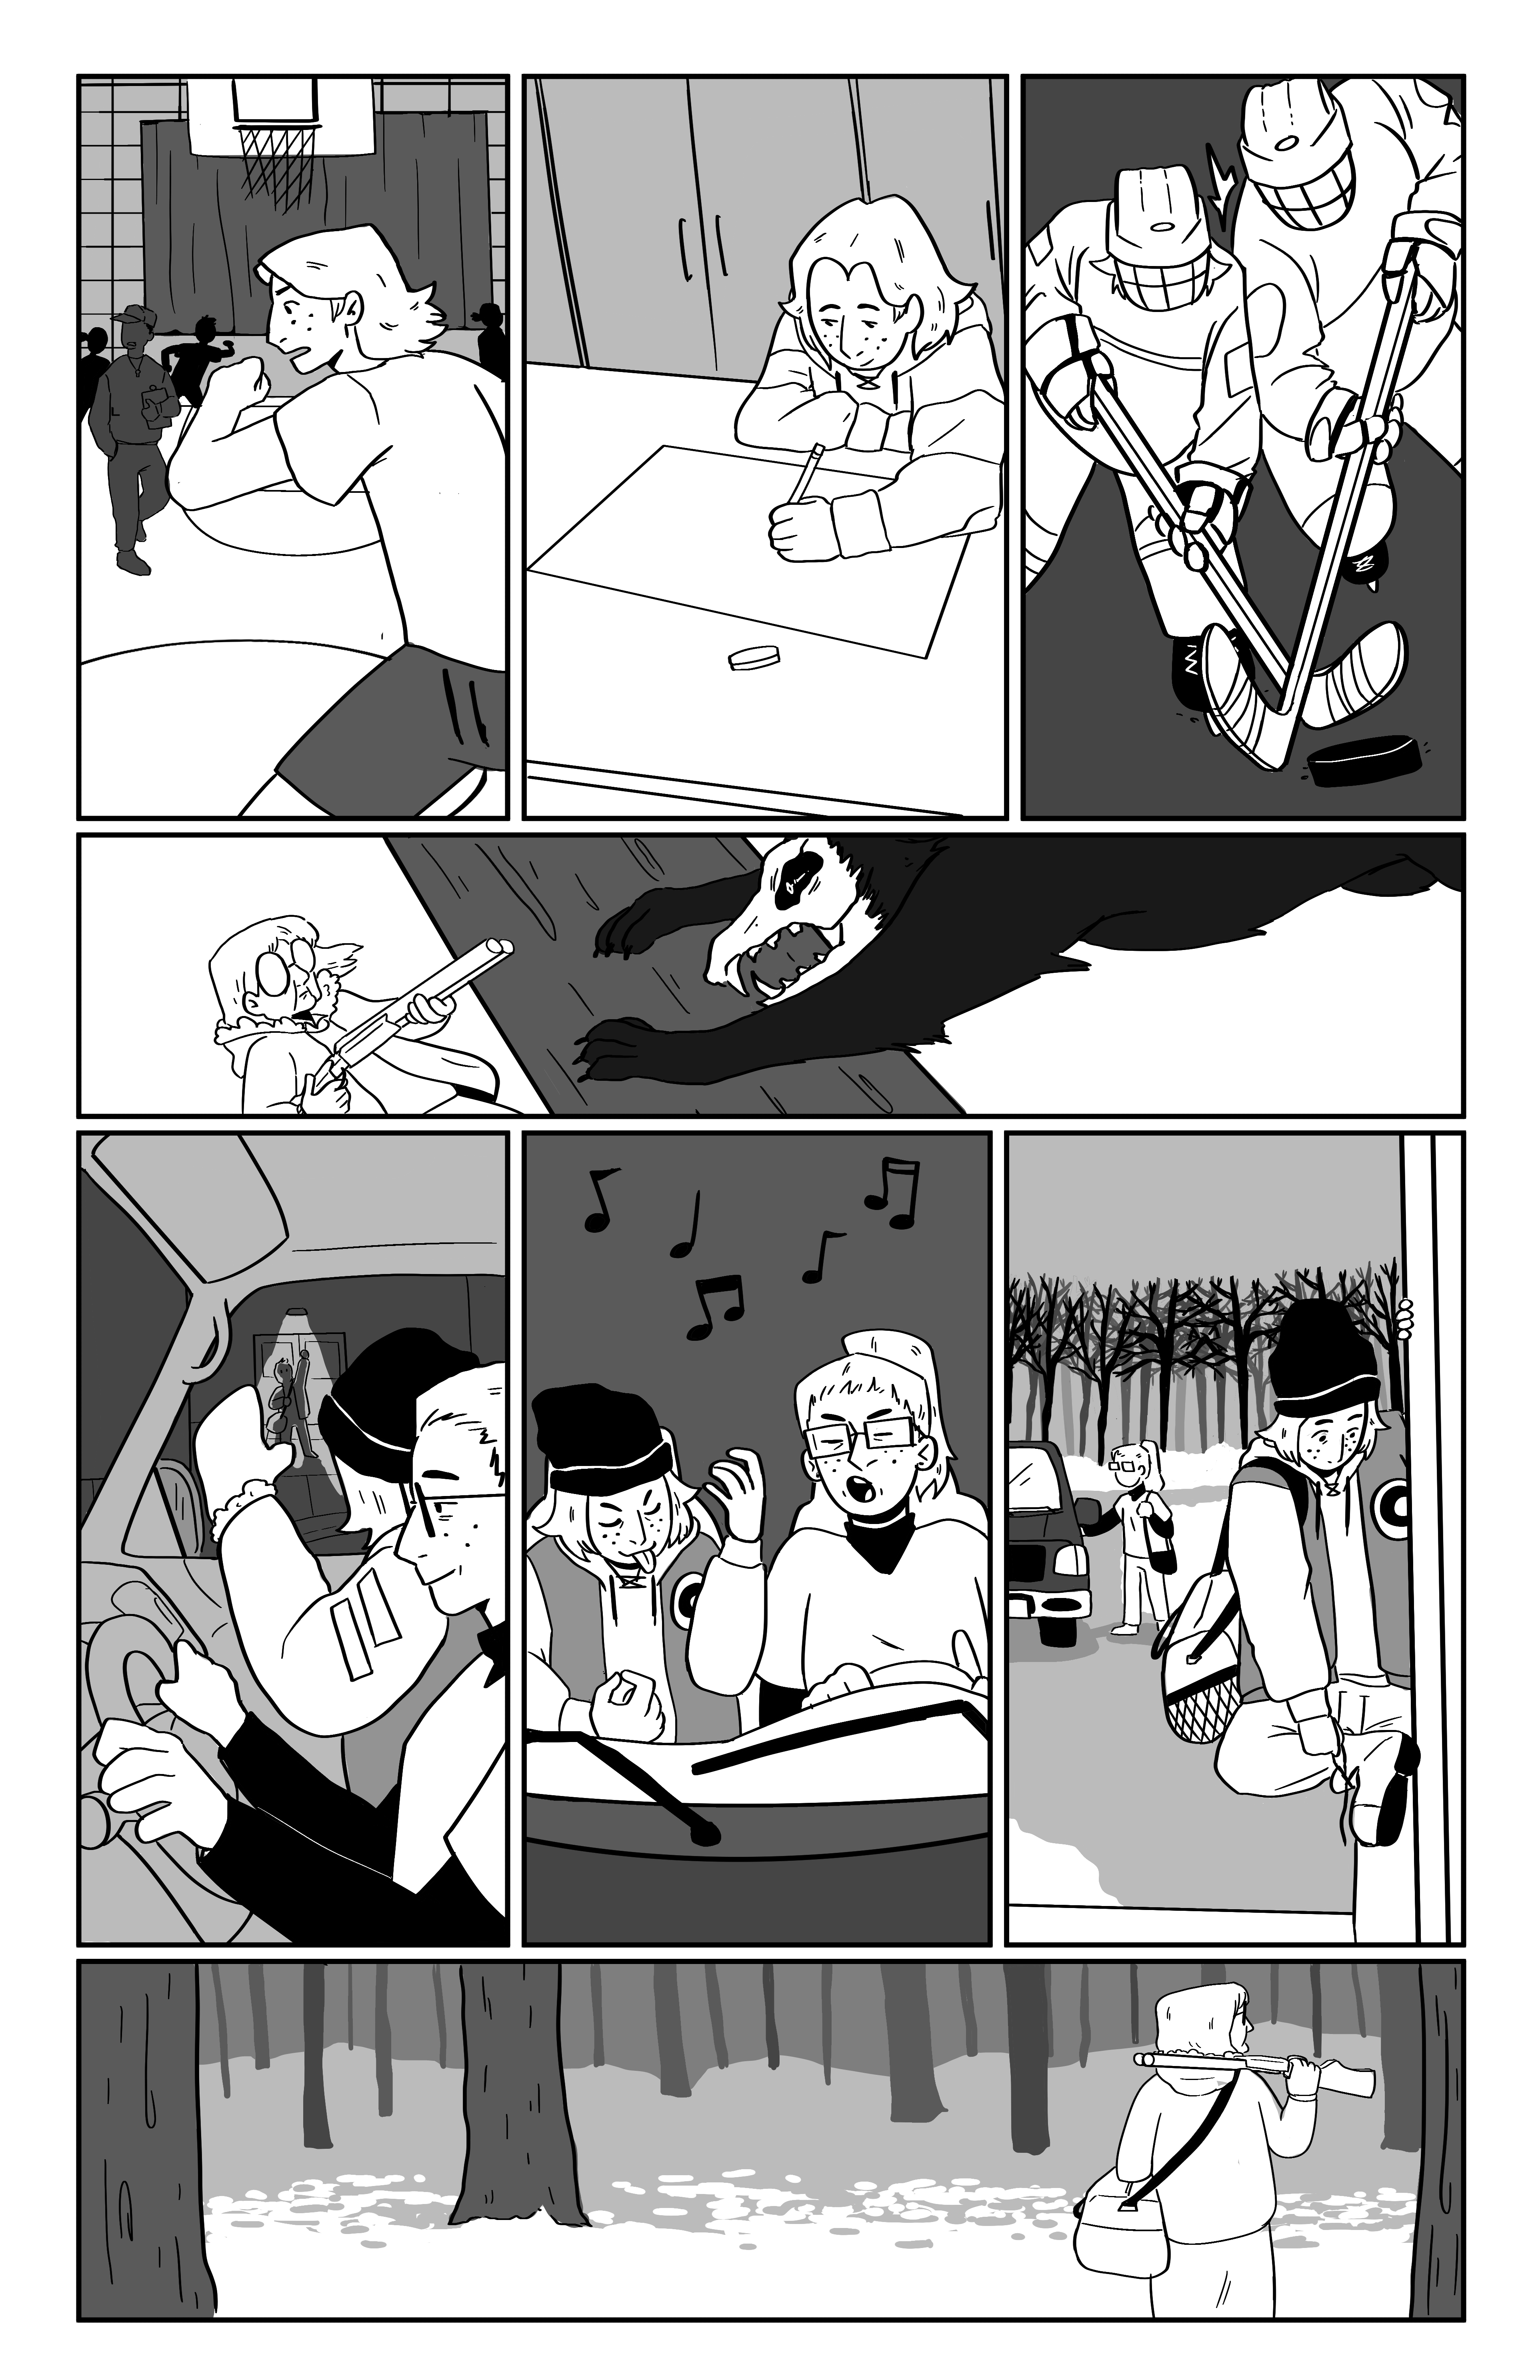 4 of 4 comic pages by Molly Jurewicz